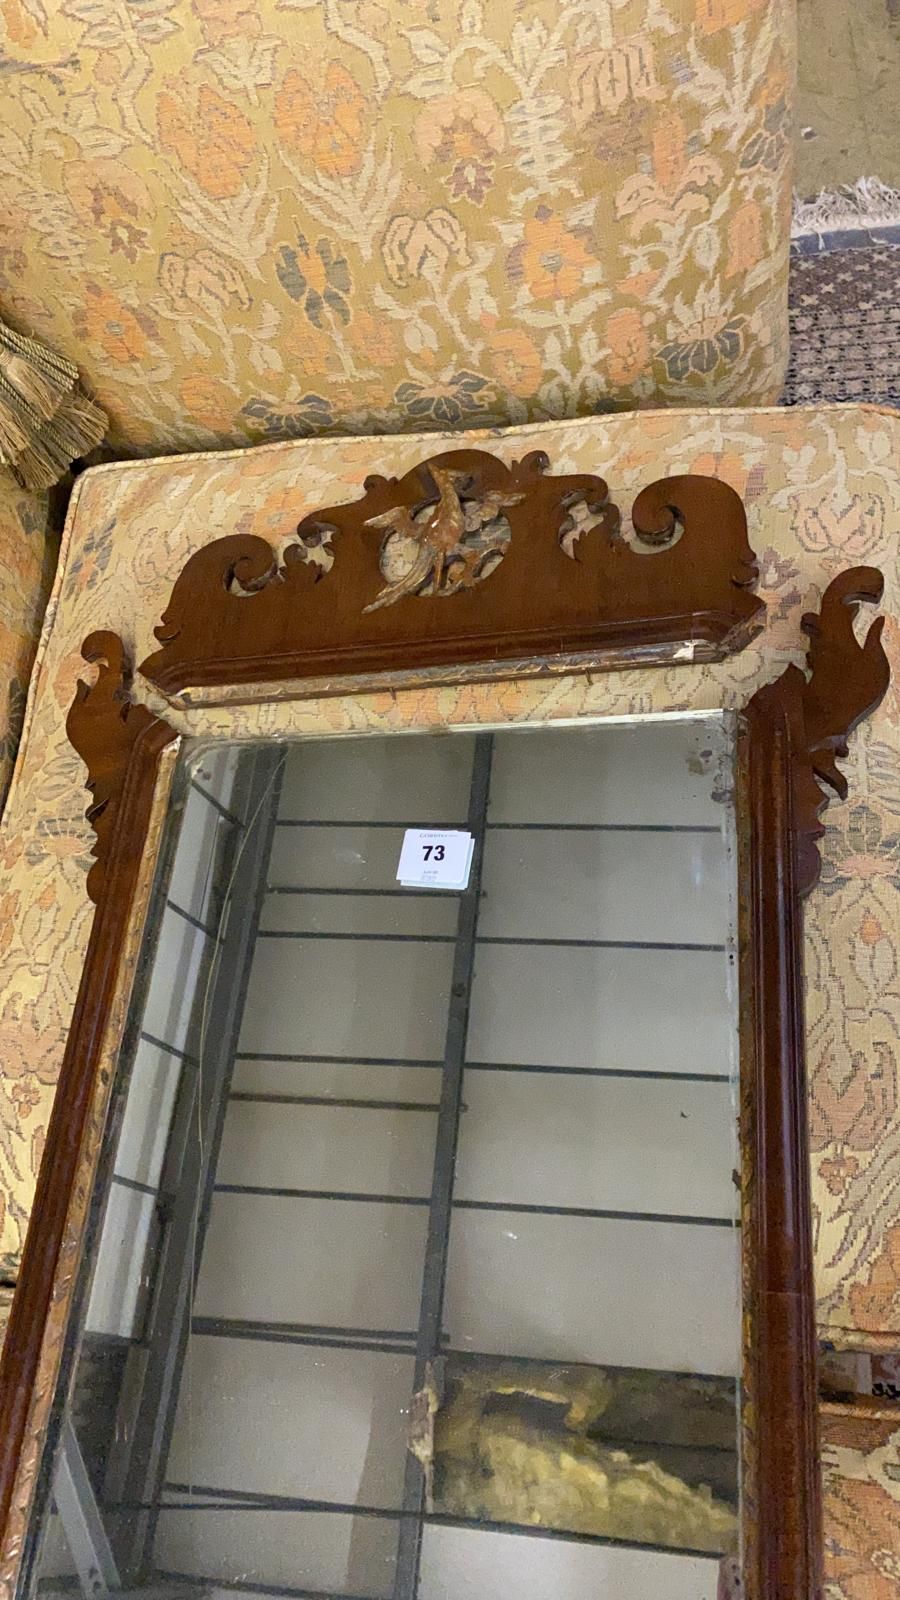 A George III style fret cut wall mirror, width height 94cm - in need of restoration